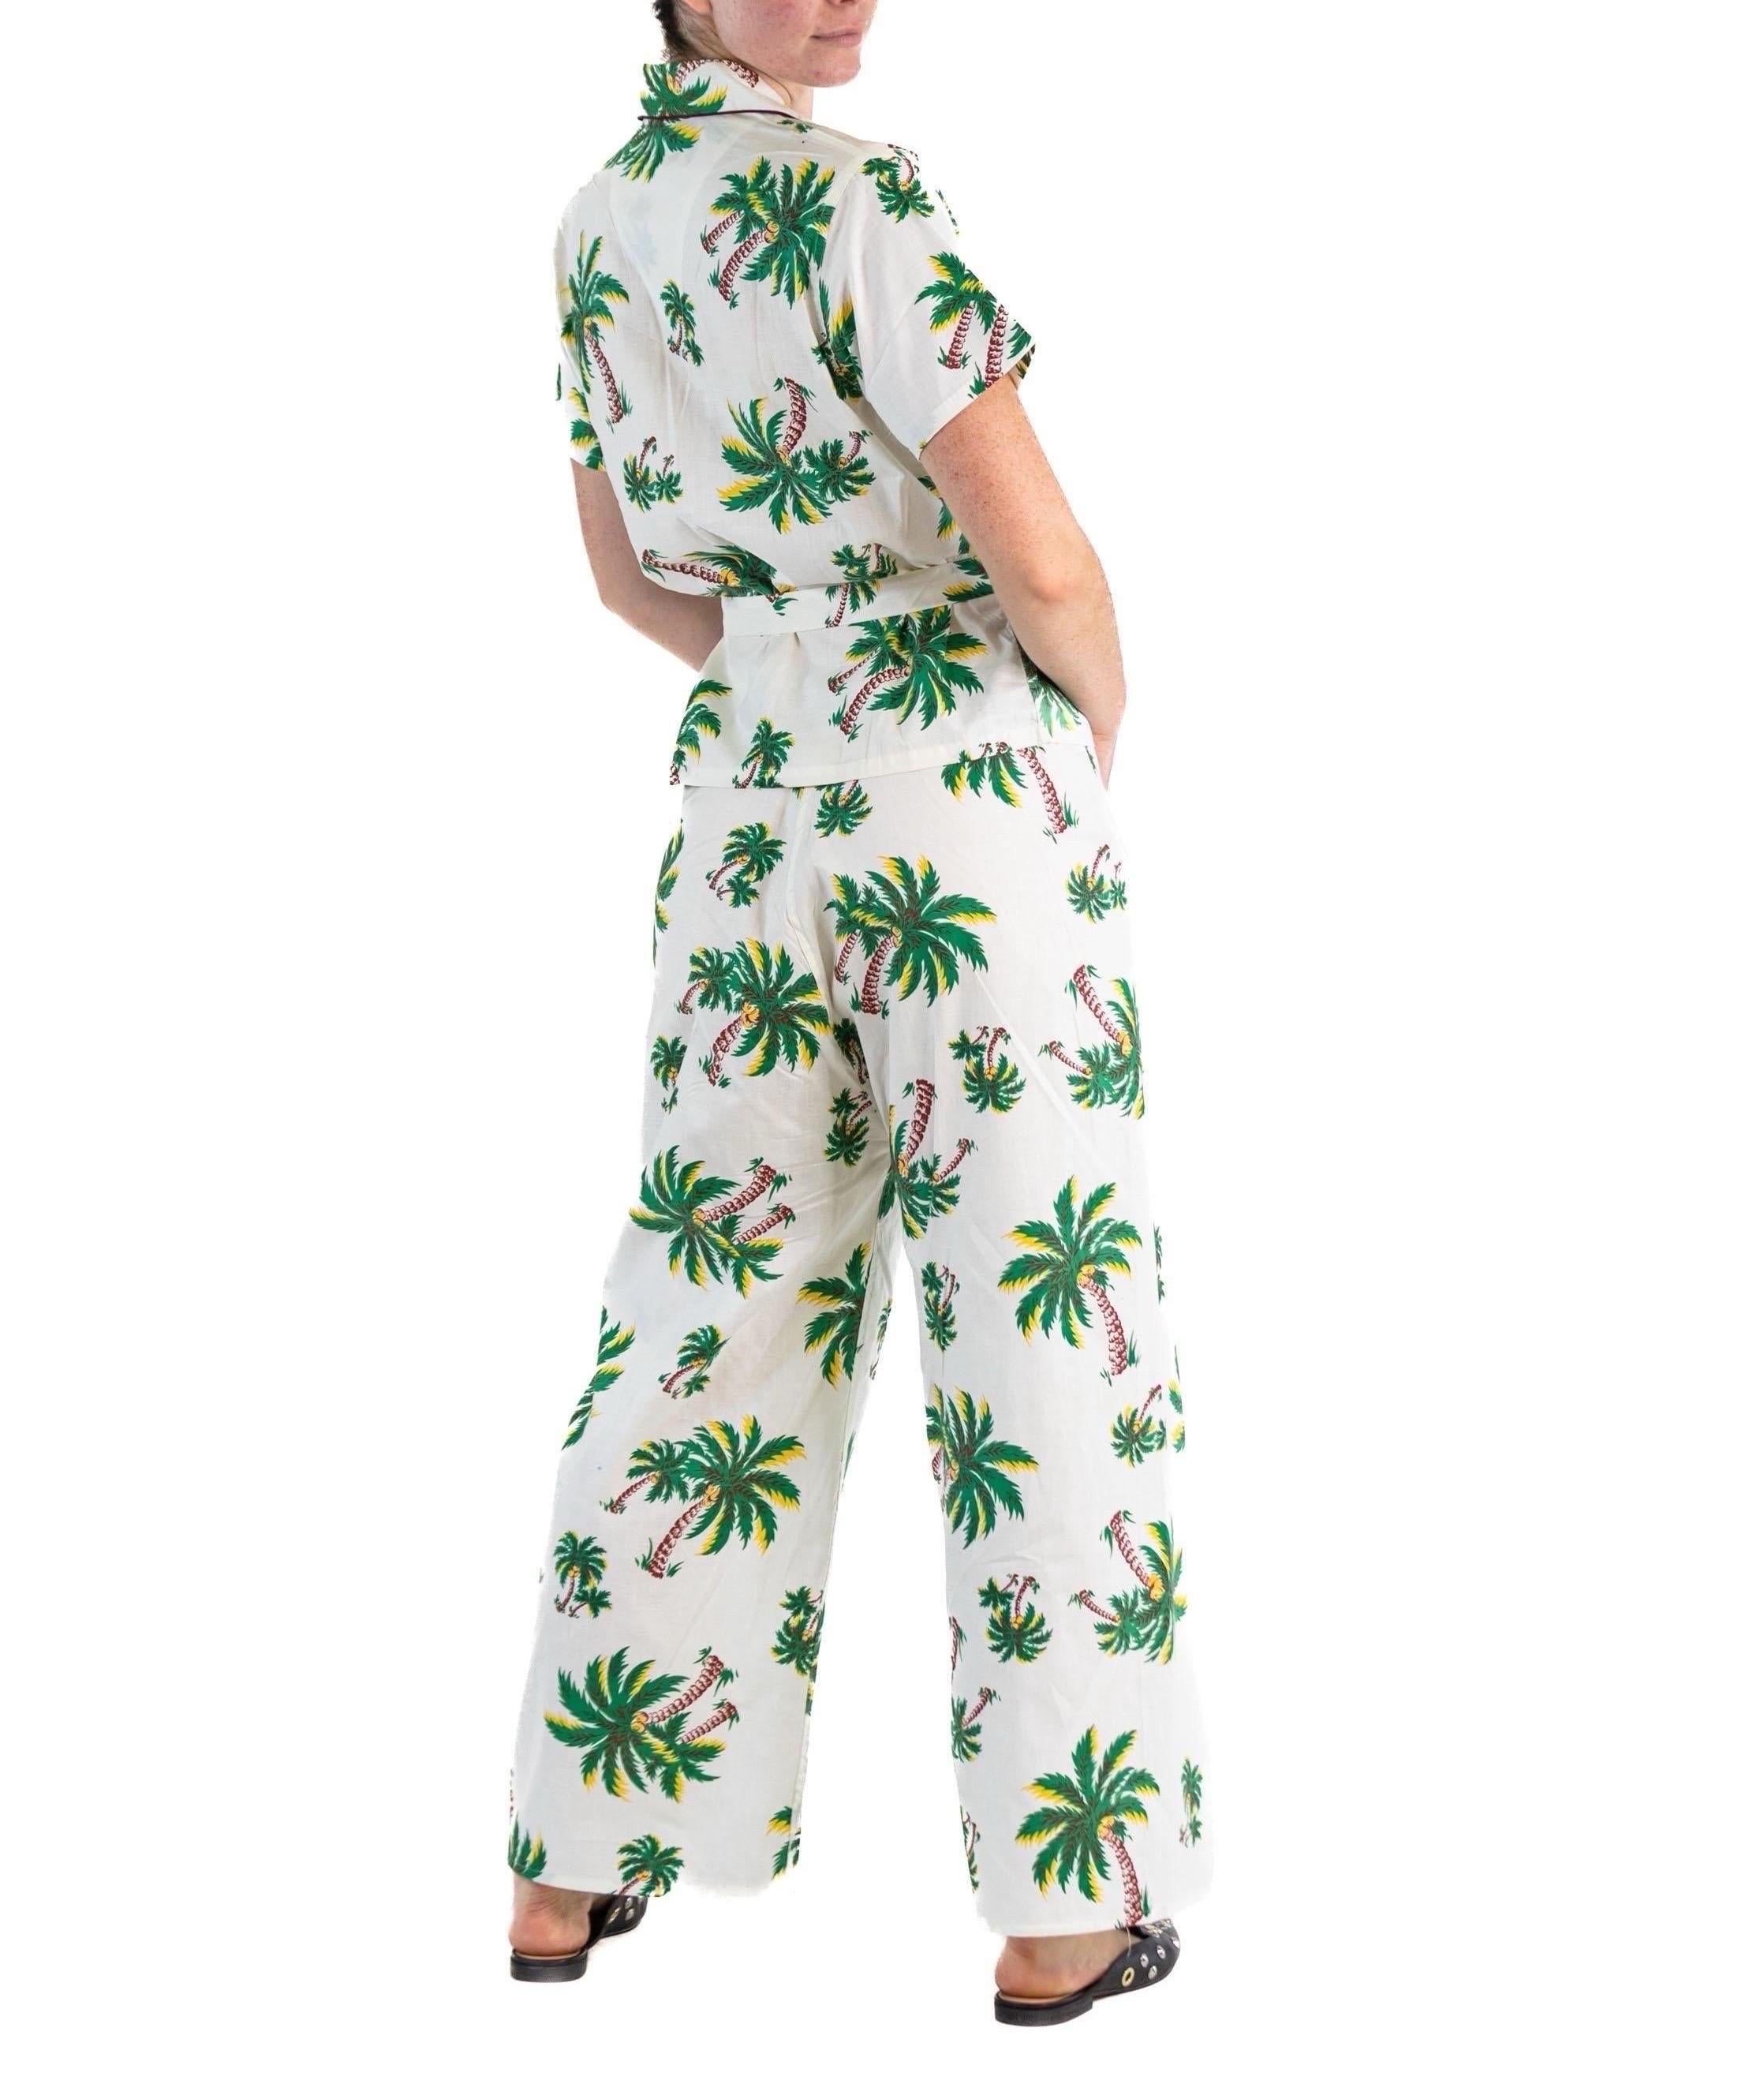 1940S CAROL BRENT White Deadstock Cotton Palm Tree Pajamas With Tassel Belt For Sale 4